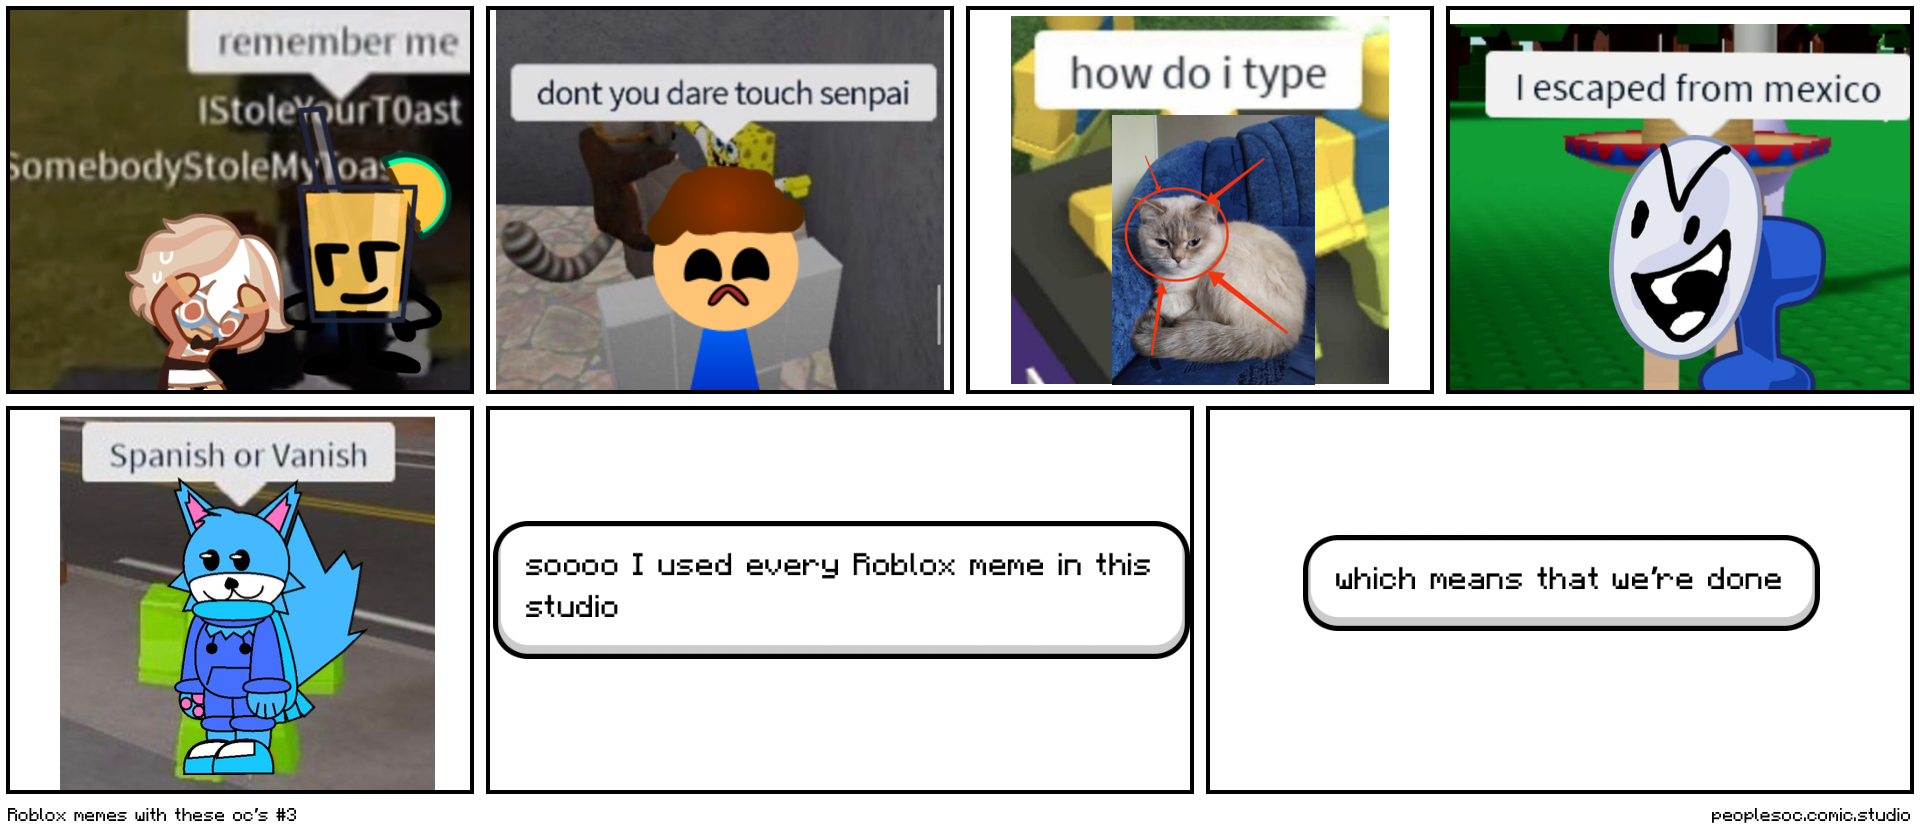 Roblox memes with these oc’s #3 - Comic Studio